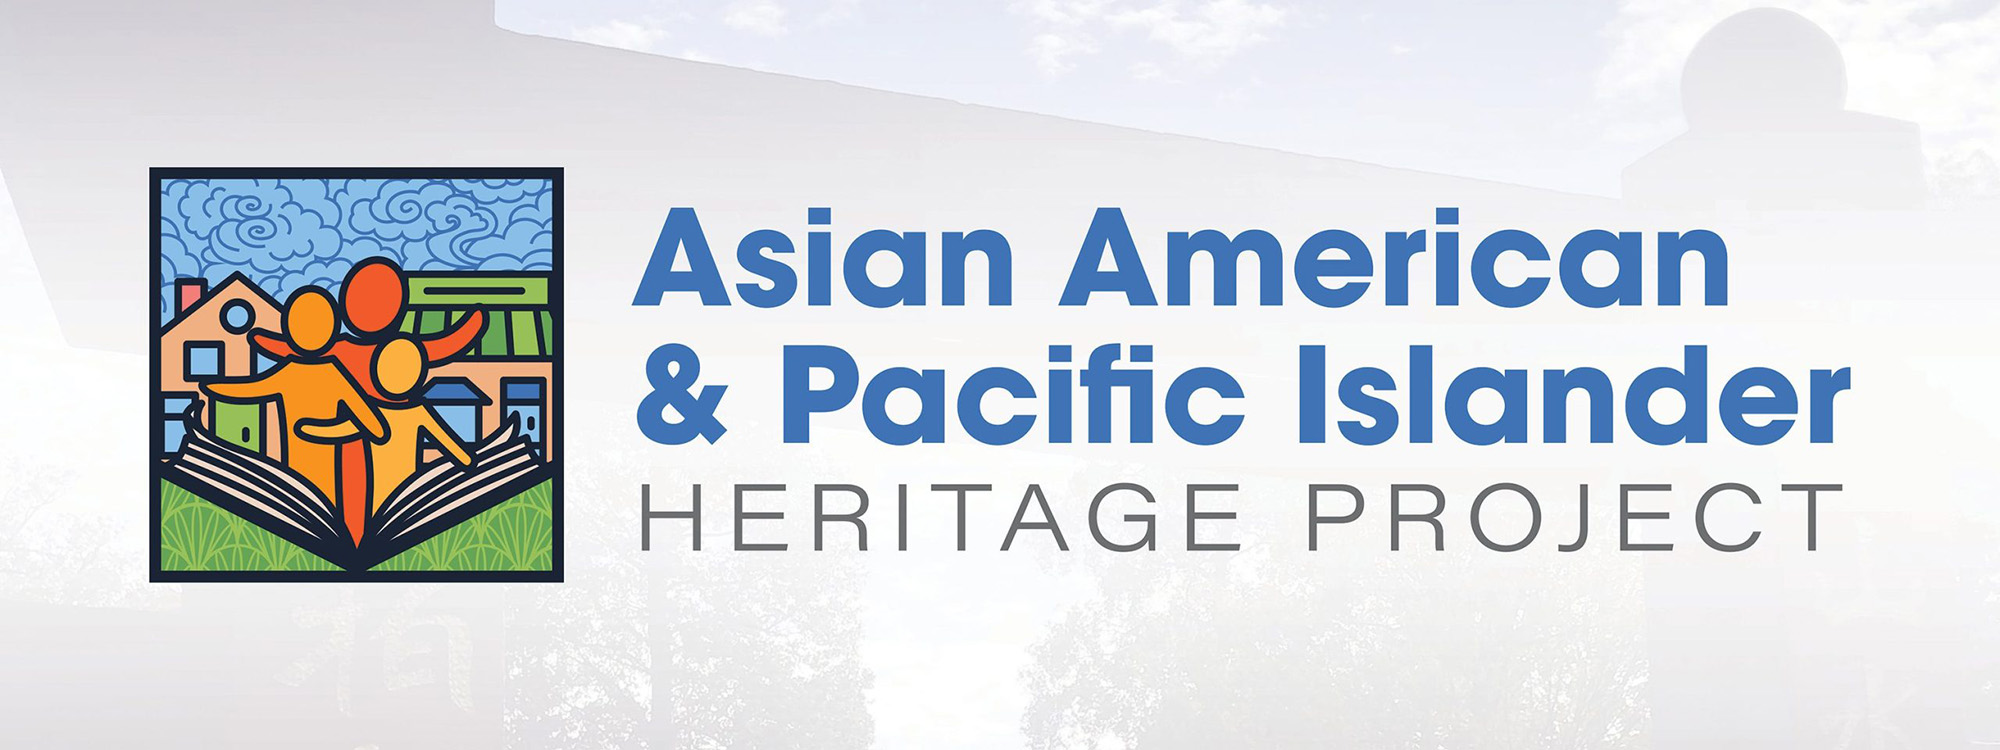 Asian American and Pacific Islander Heritage Project